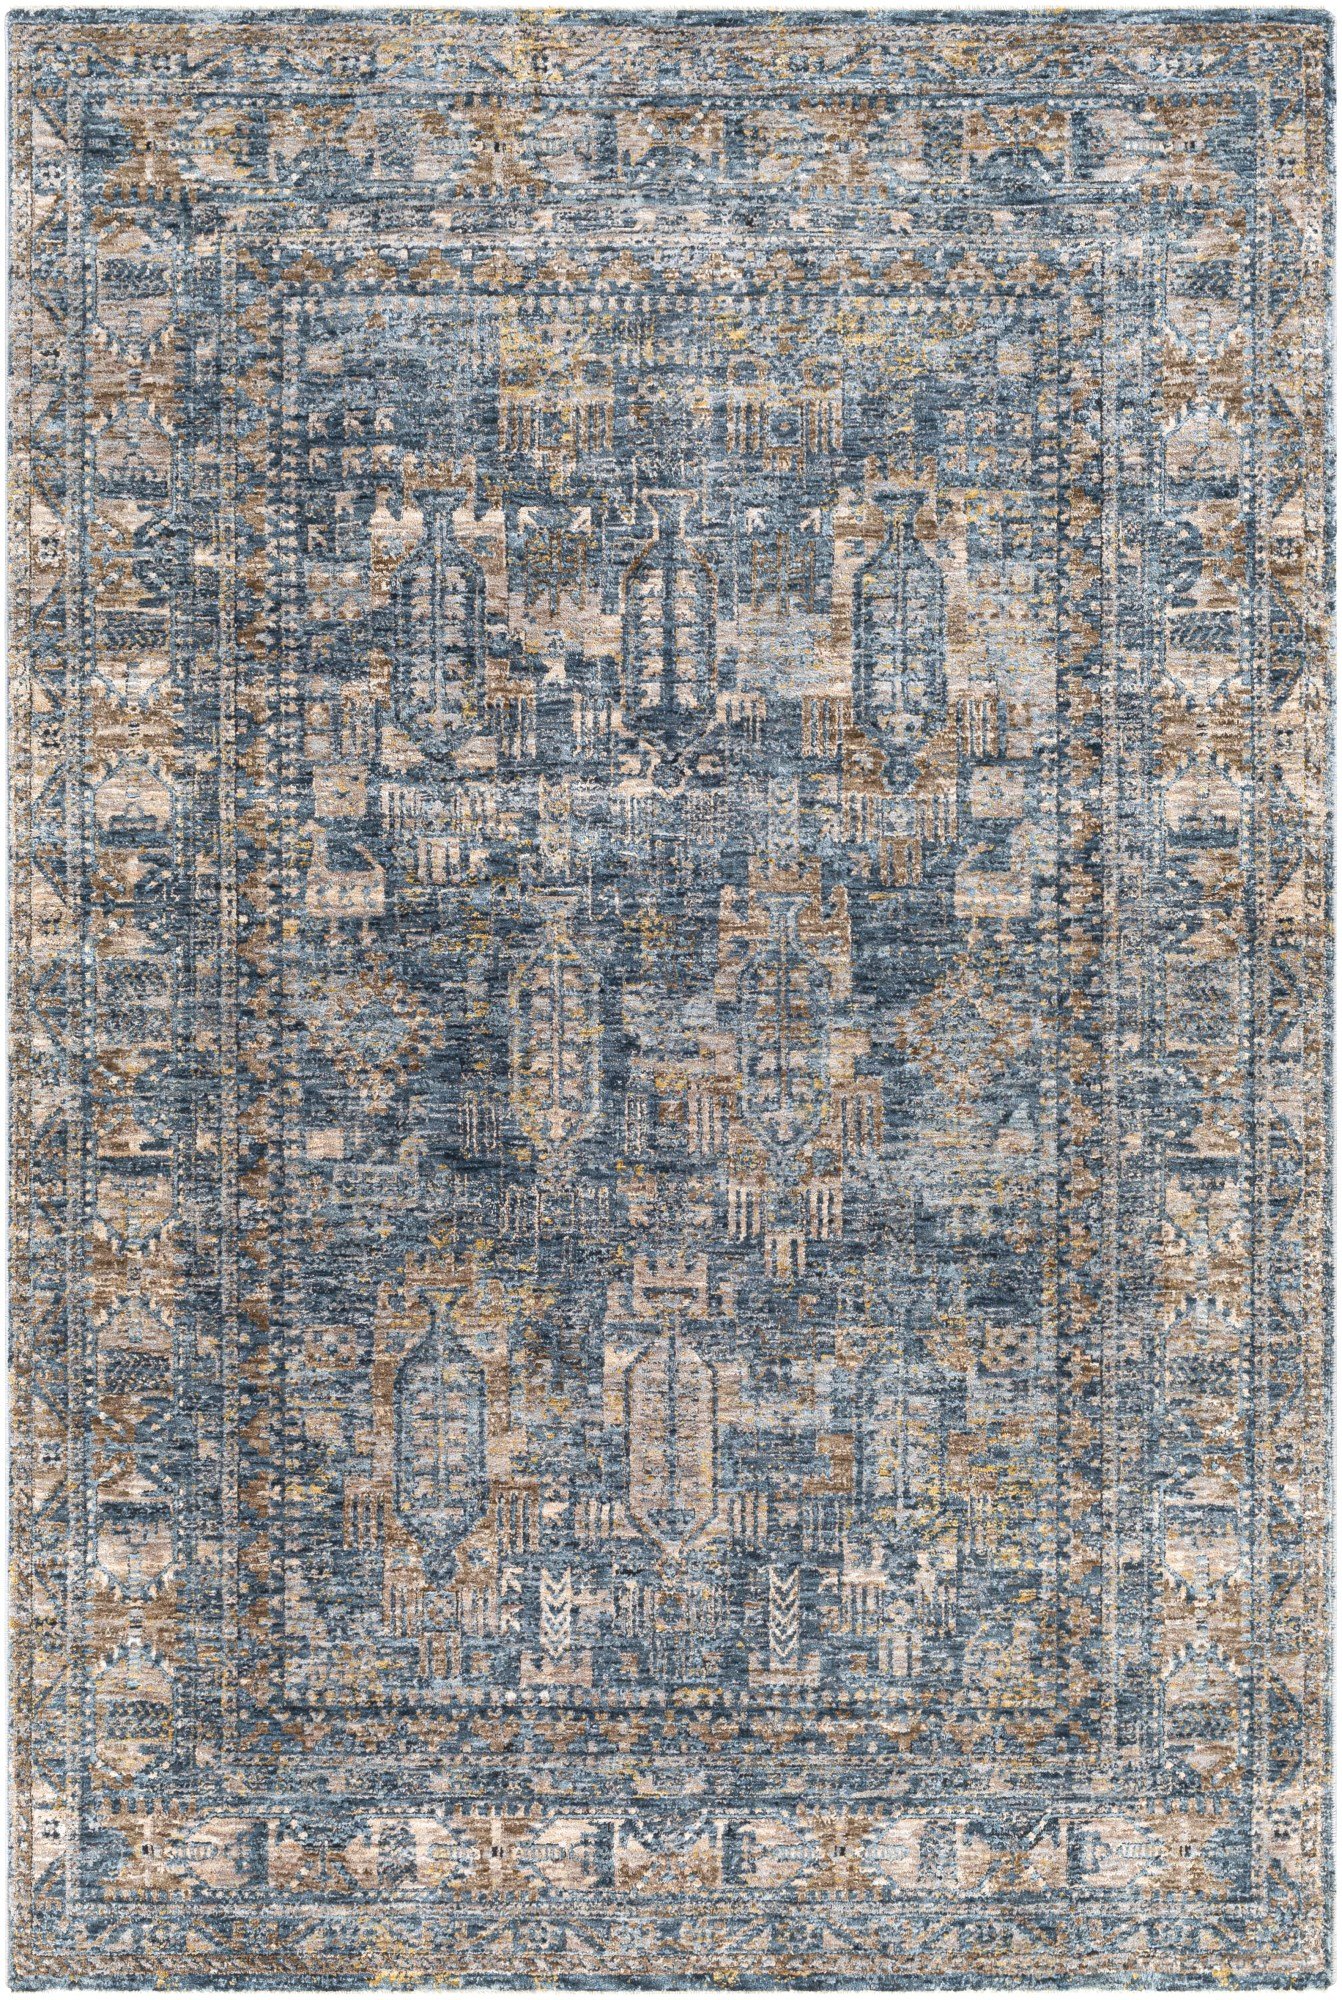 5x7 And 5x8 Blue Area Rugs Direct, Dark Blue Area Rug 5 215 70